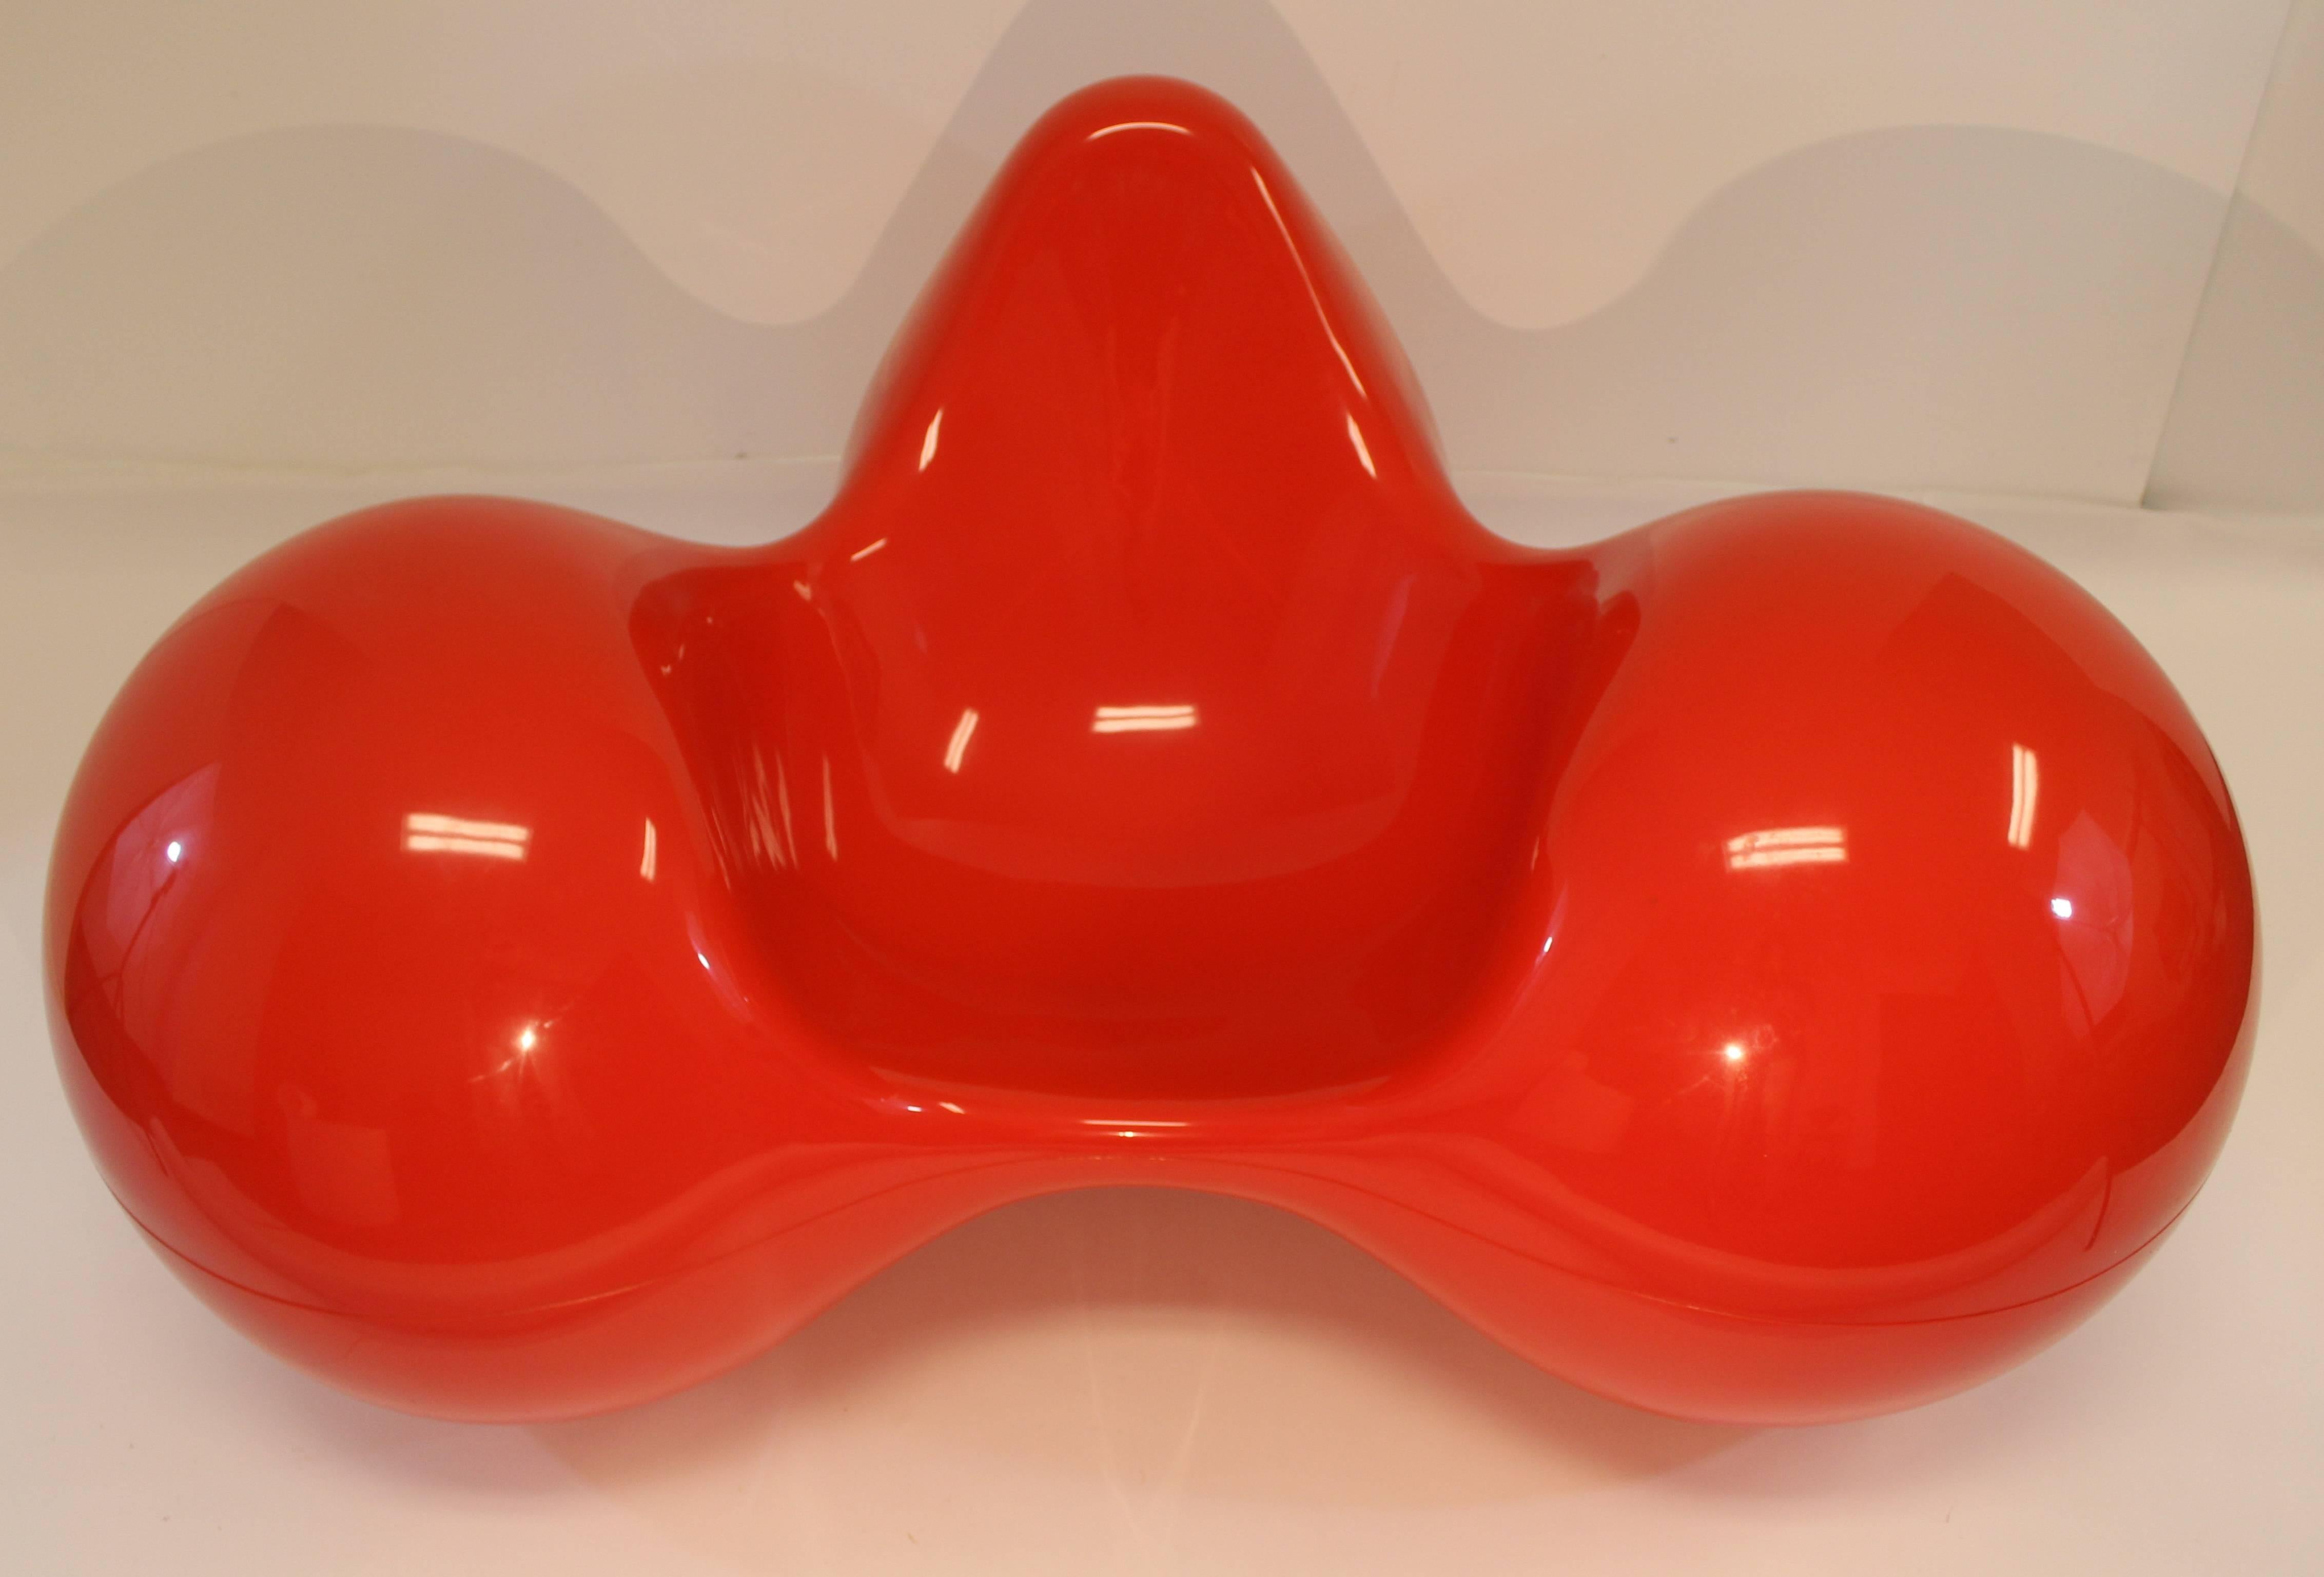 
Rare, awesome and totally unique original acrylic Tomato chair by Eero Aarnio, made in Finland. In excellent condition. The dimensions are 54